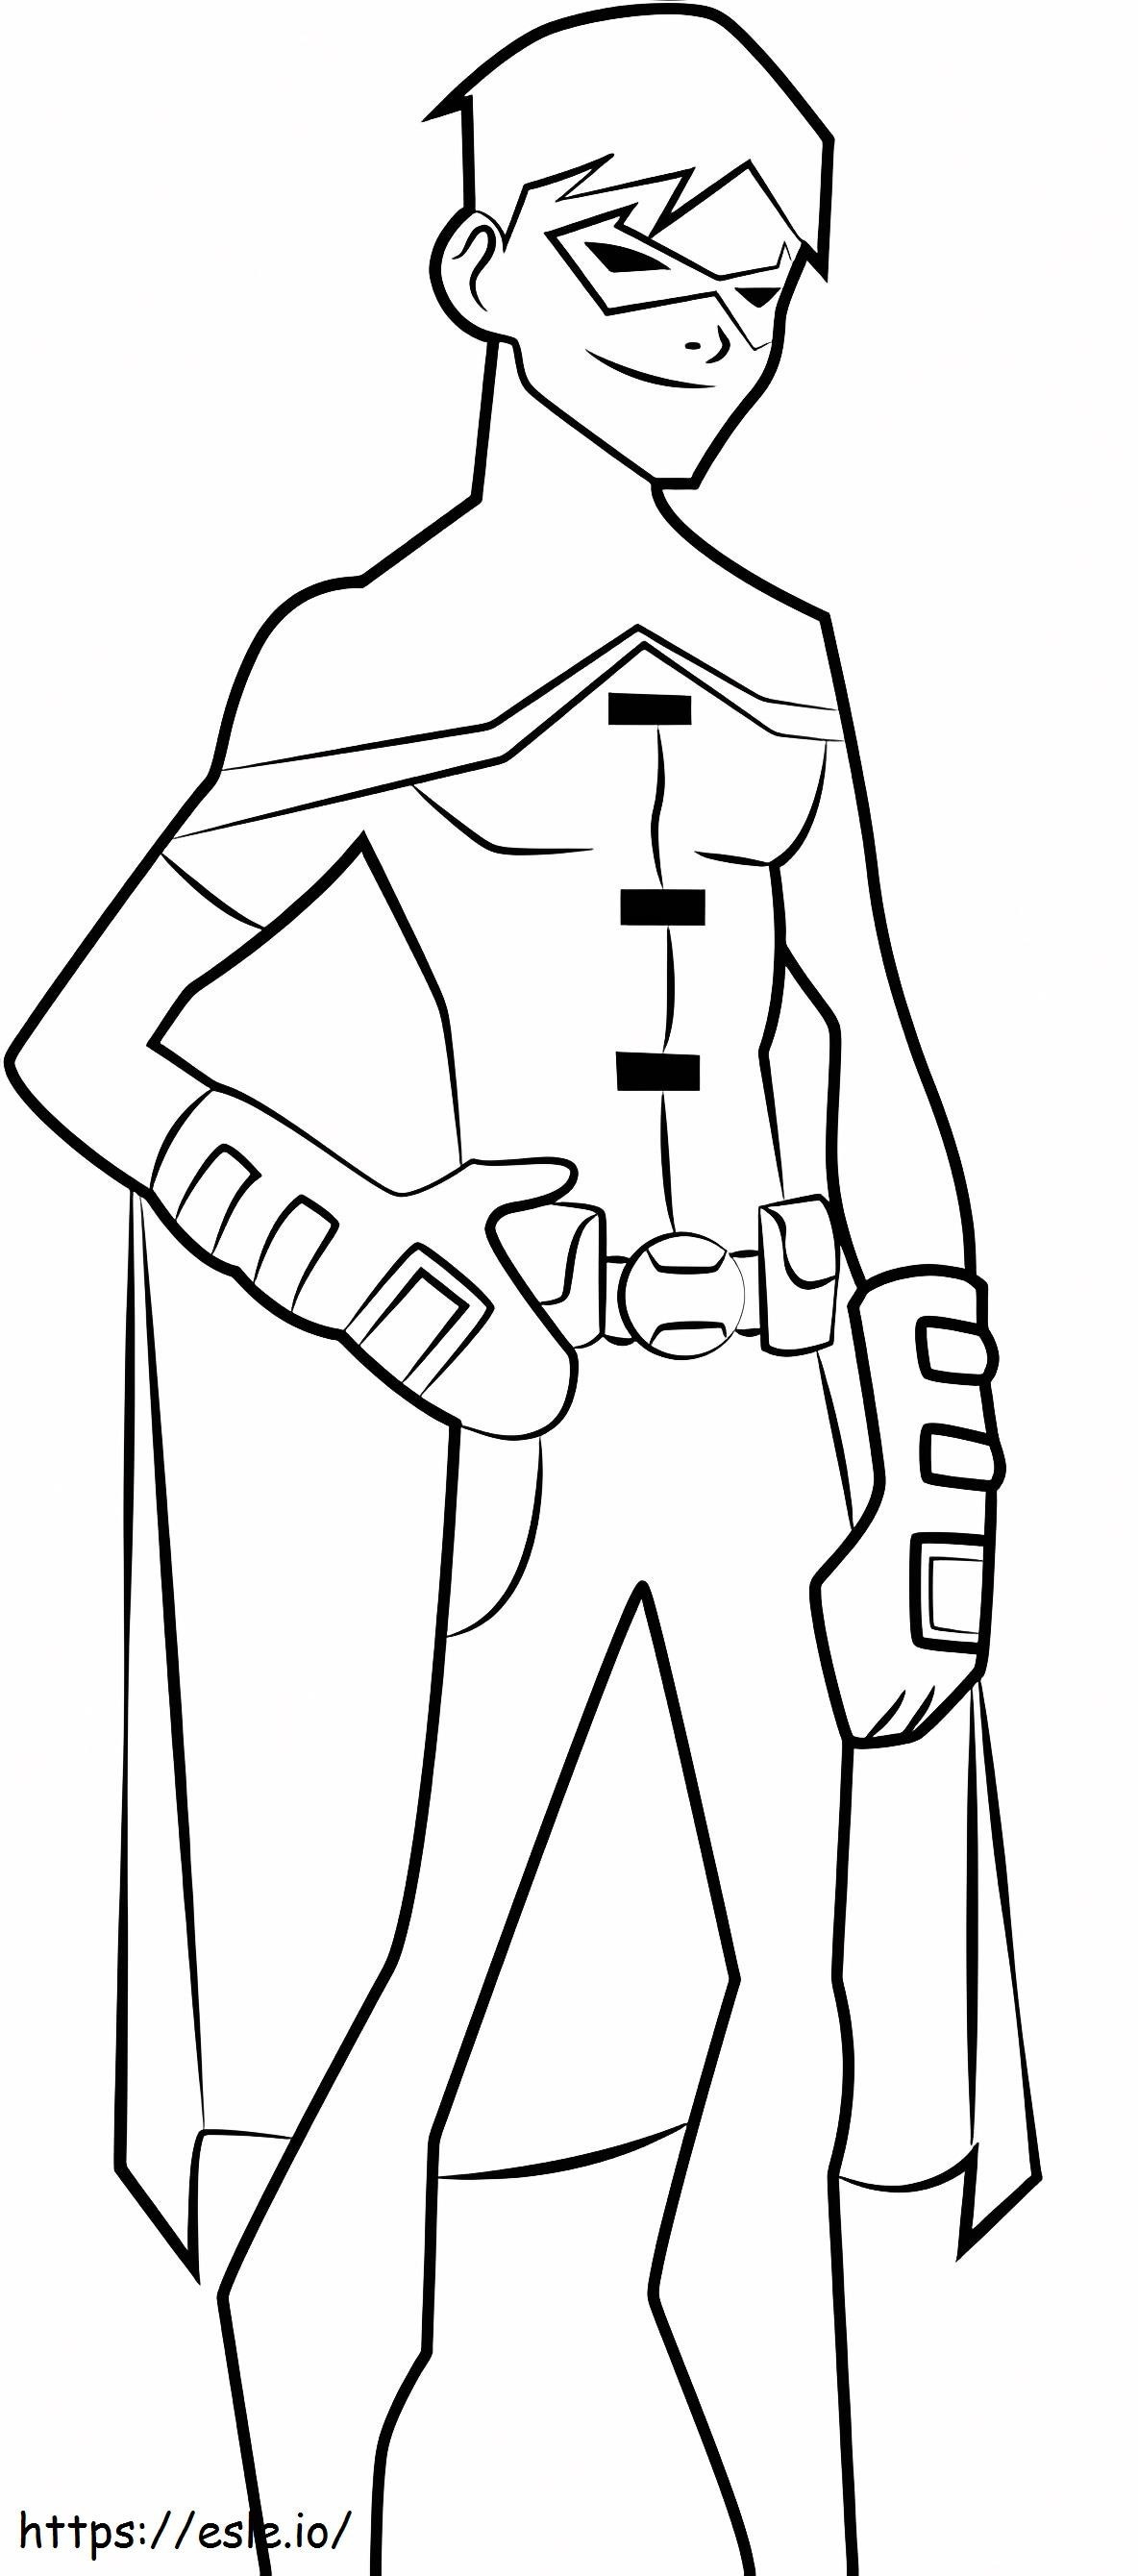 1532055144 Robin A4 coloring page